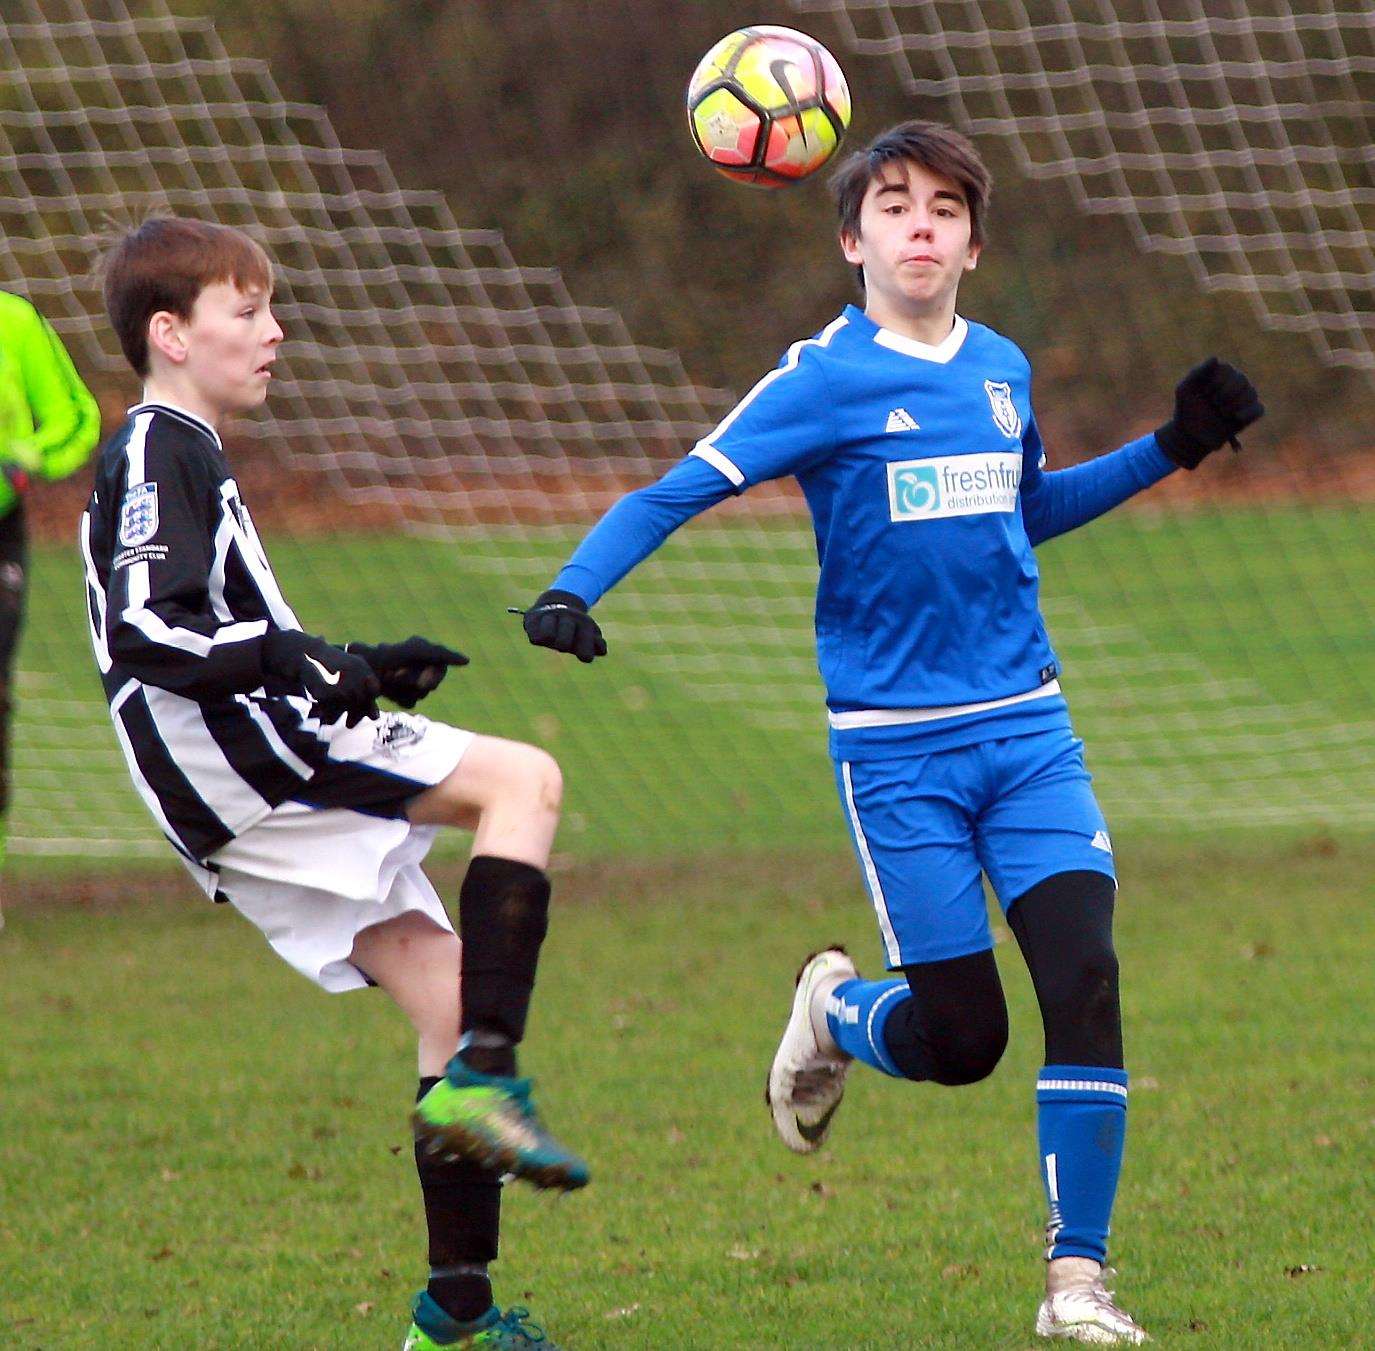 Milton and Fulston (stripes) got the better of New Road in Under-14 Division 2 Picture: Phil Lee